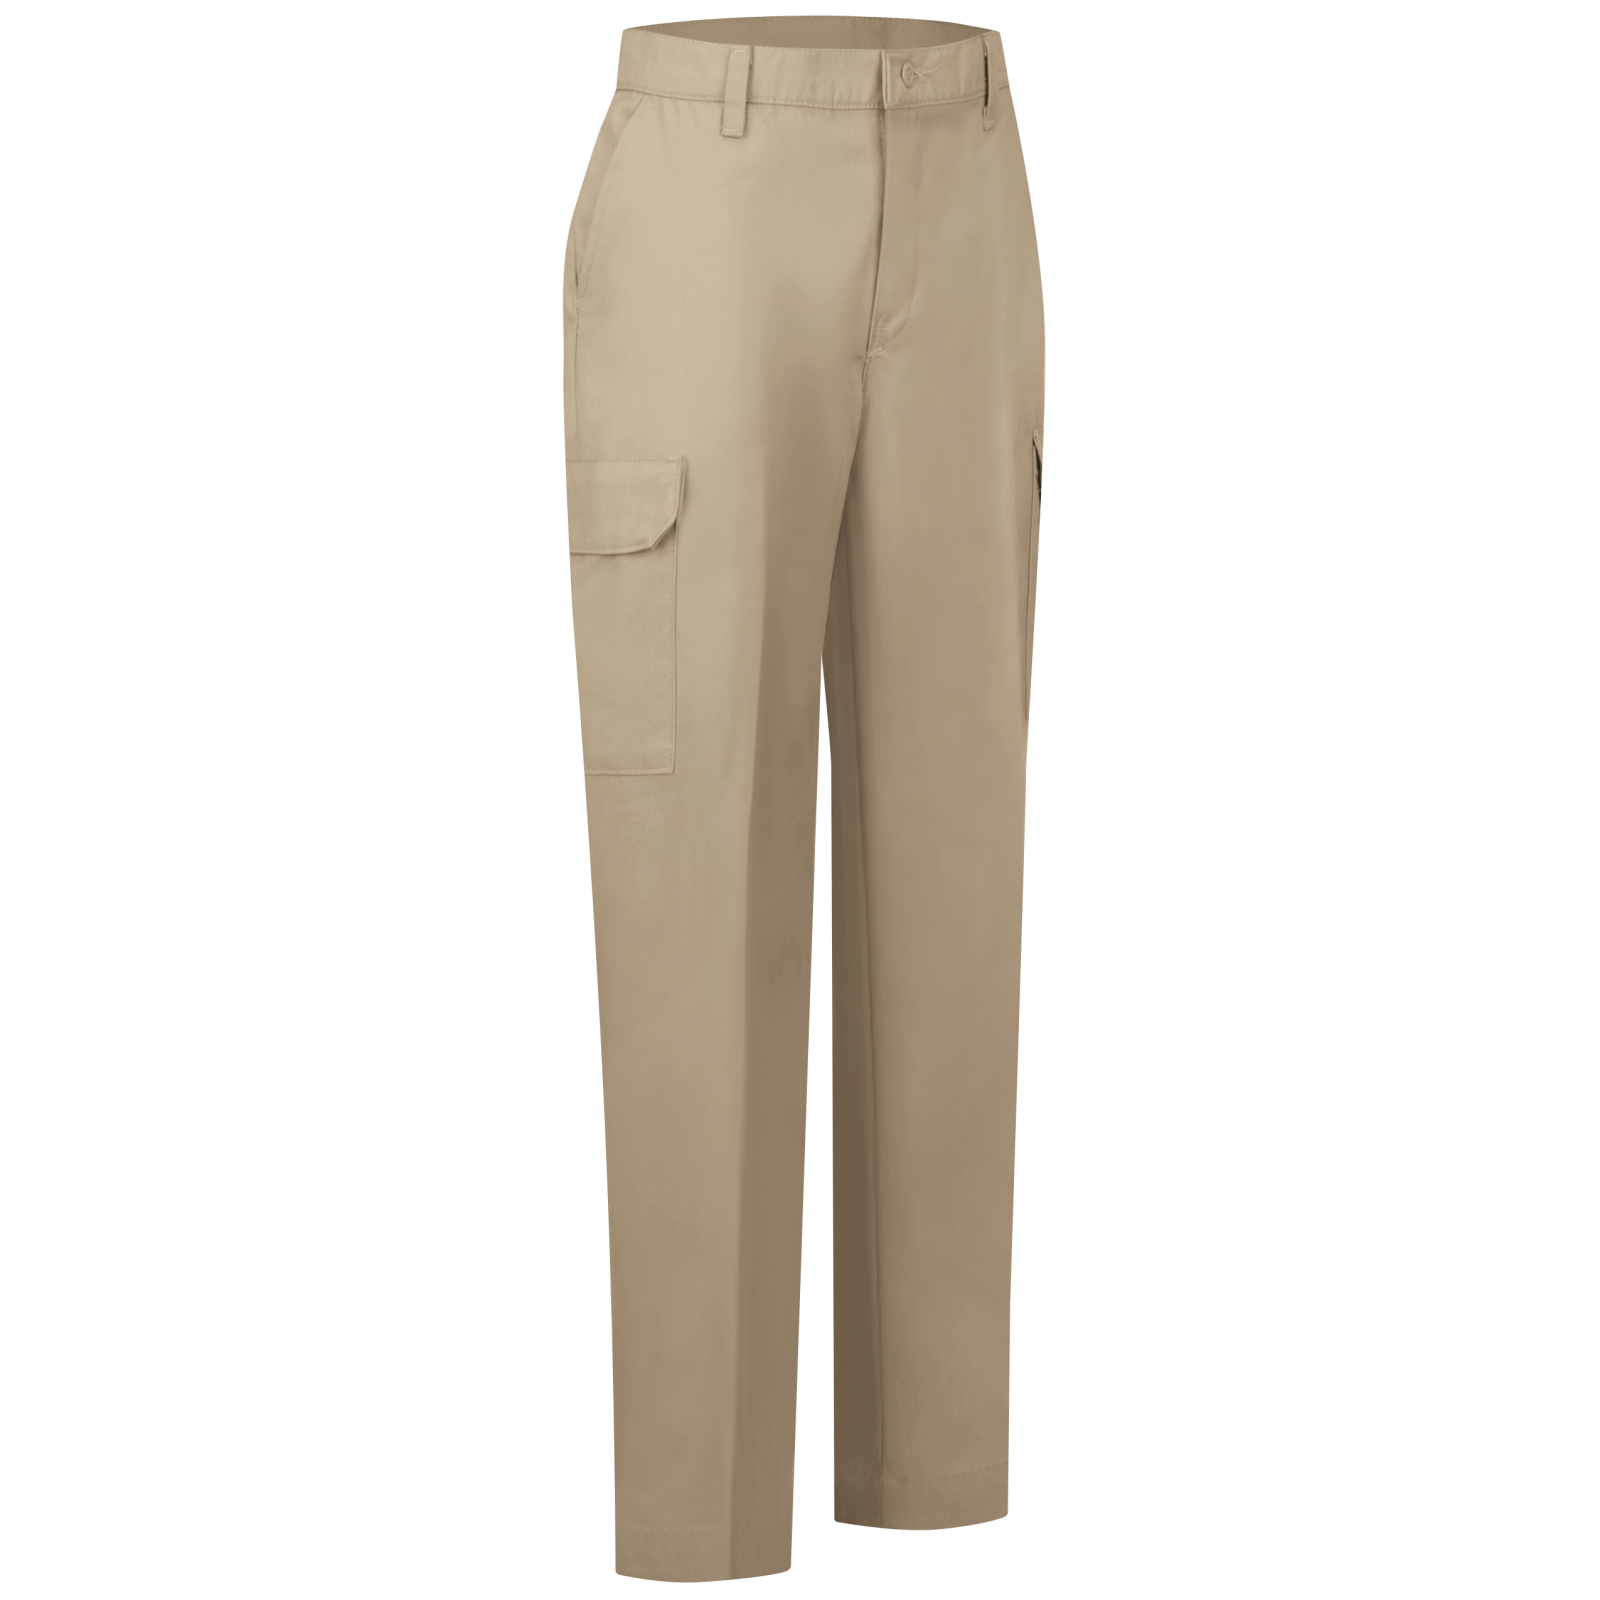 women's pants with cargo pockets